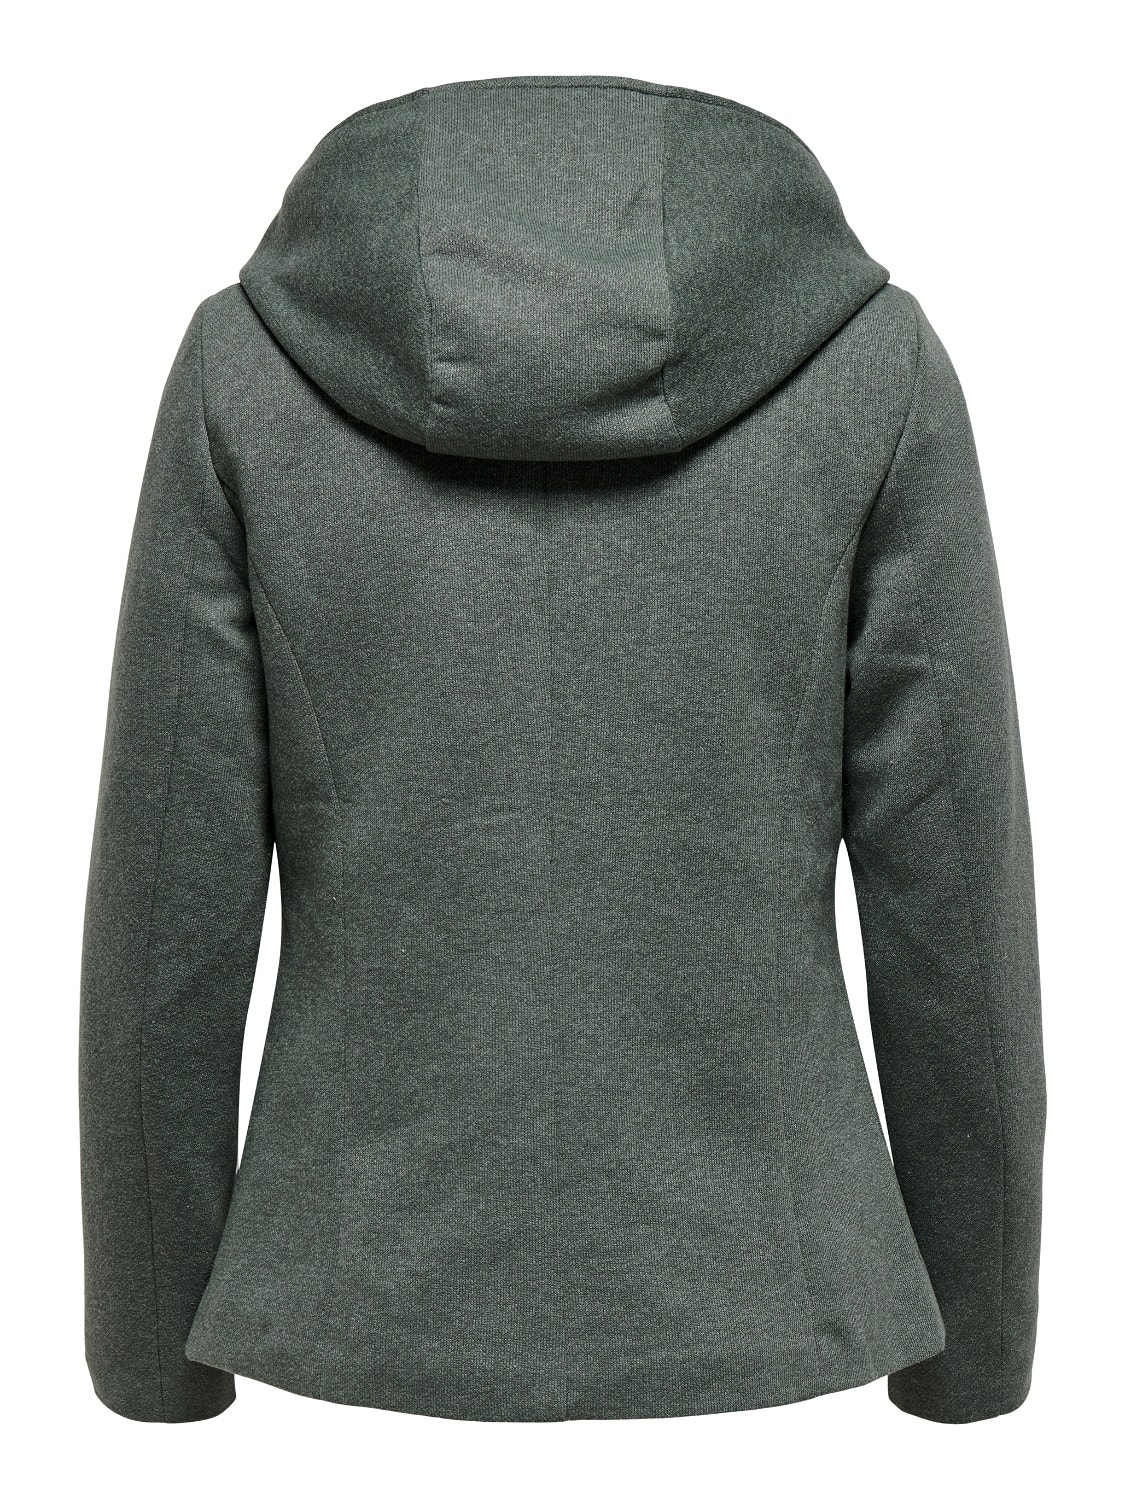 ONLY Drapy oversized hood Jacket -Balsam Green - 15186683